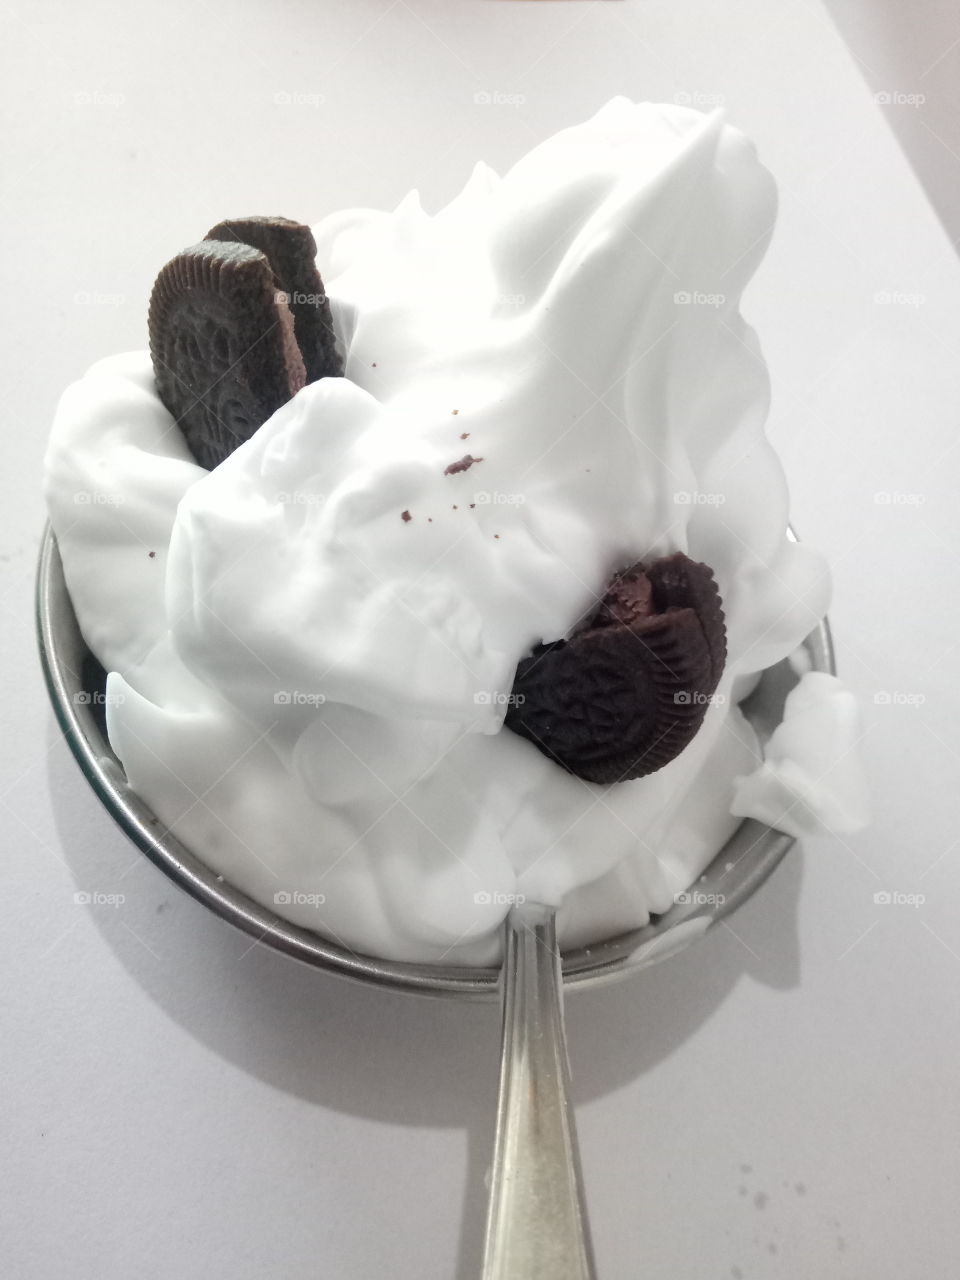 this is Oreo biscuit and ice cream.